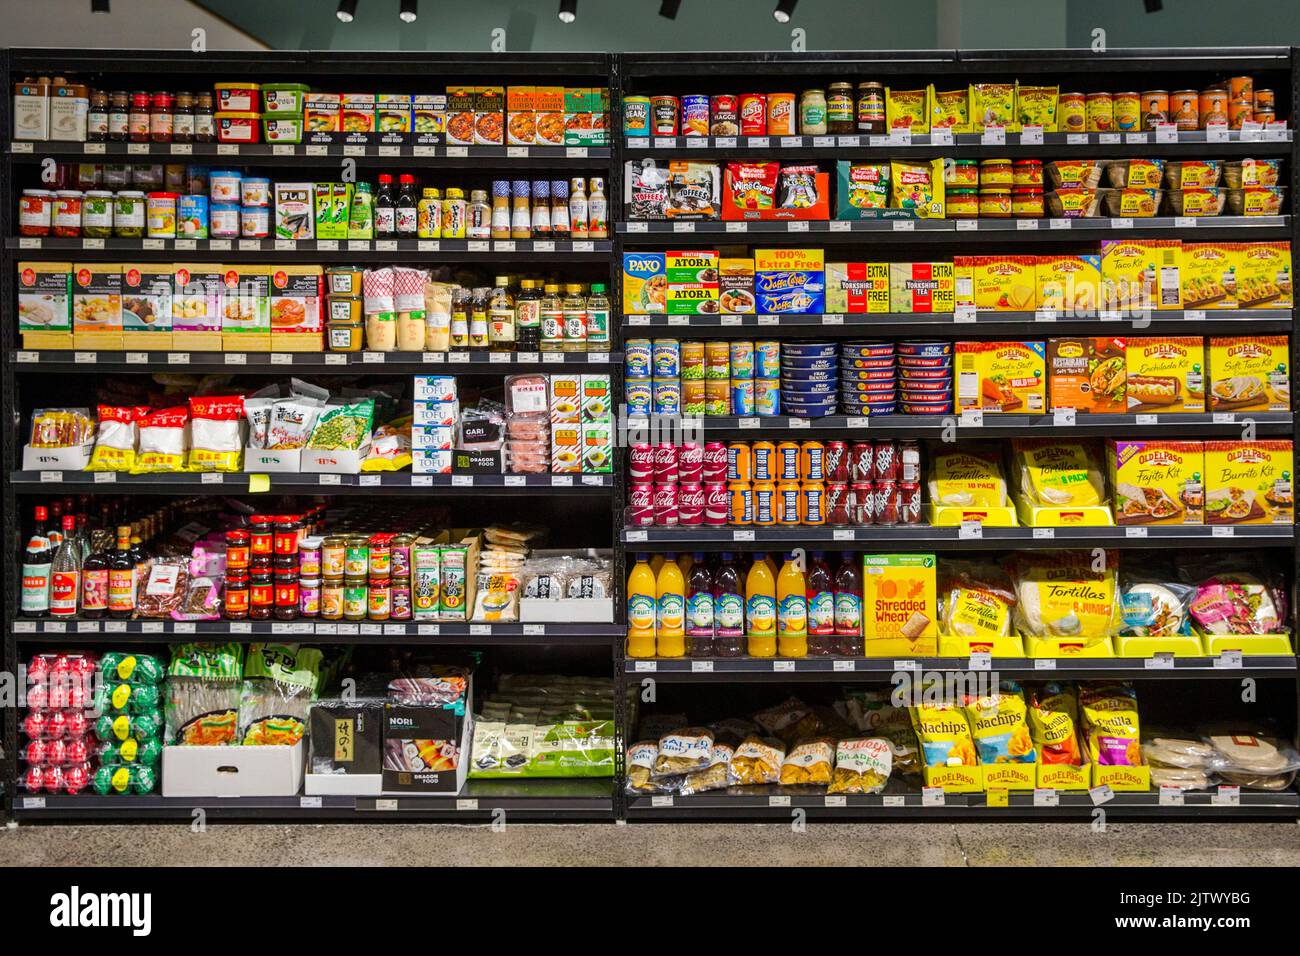 General produce on the shelves in a supermarket. Photo: David Rowland / One-Image.com Stock Photo